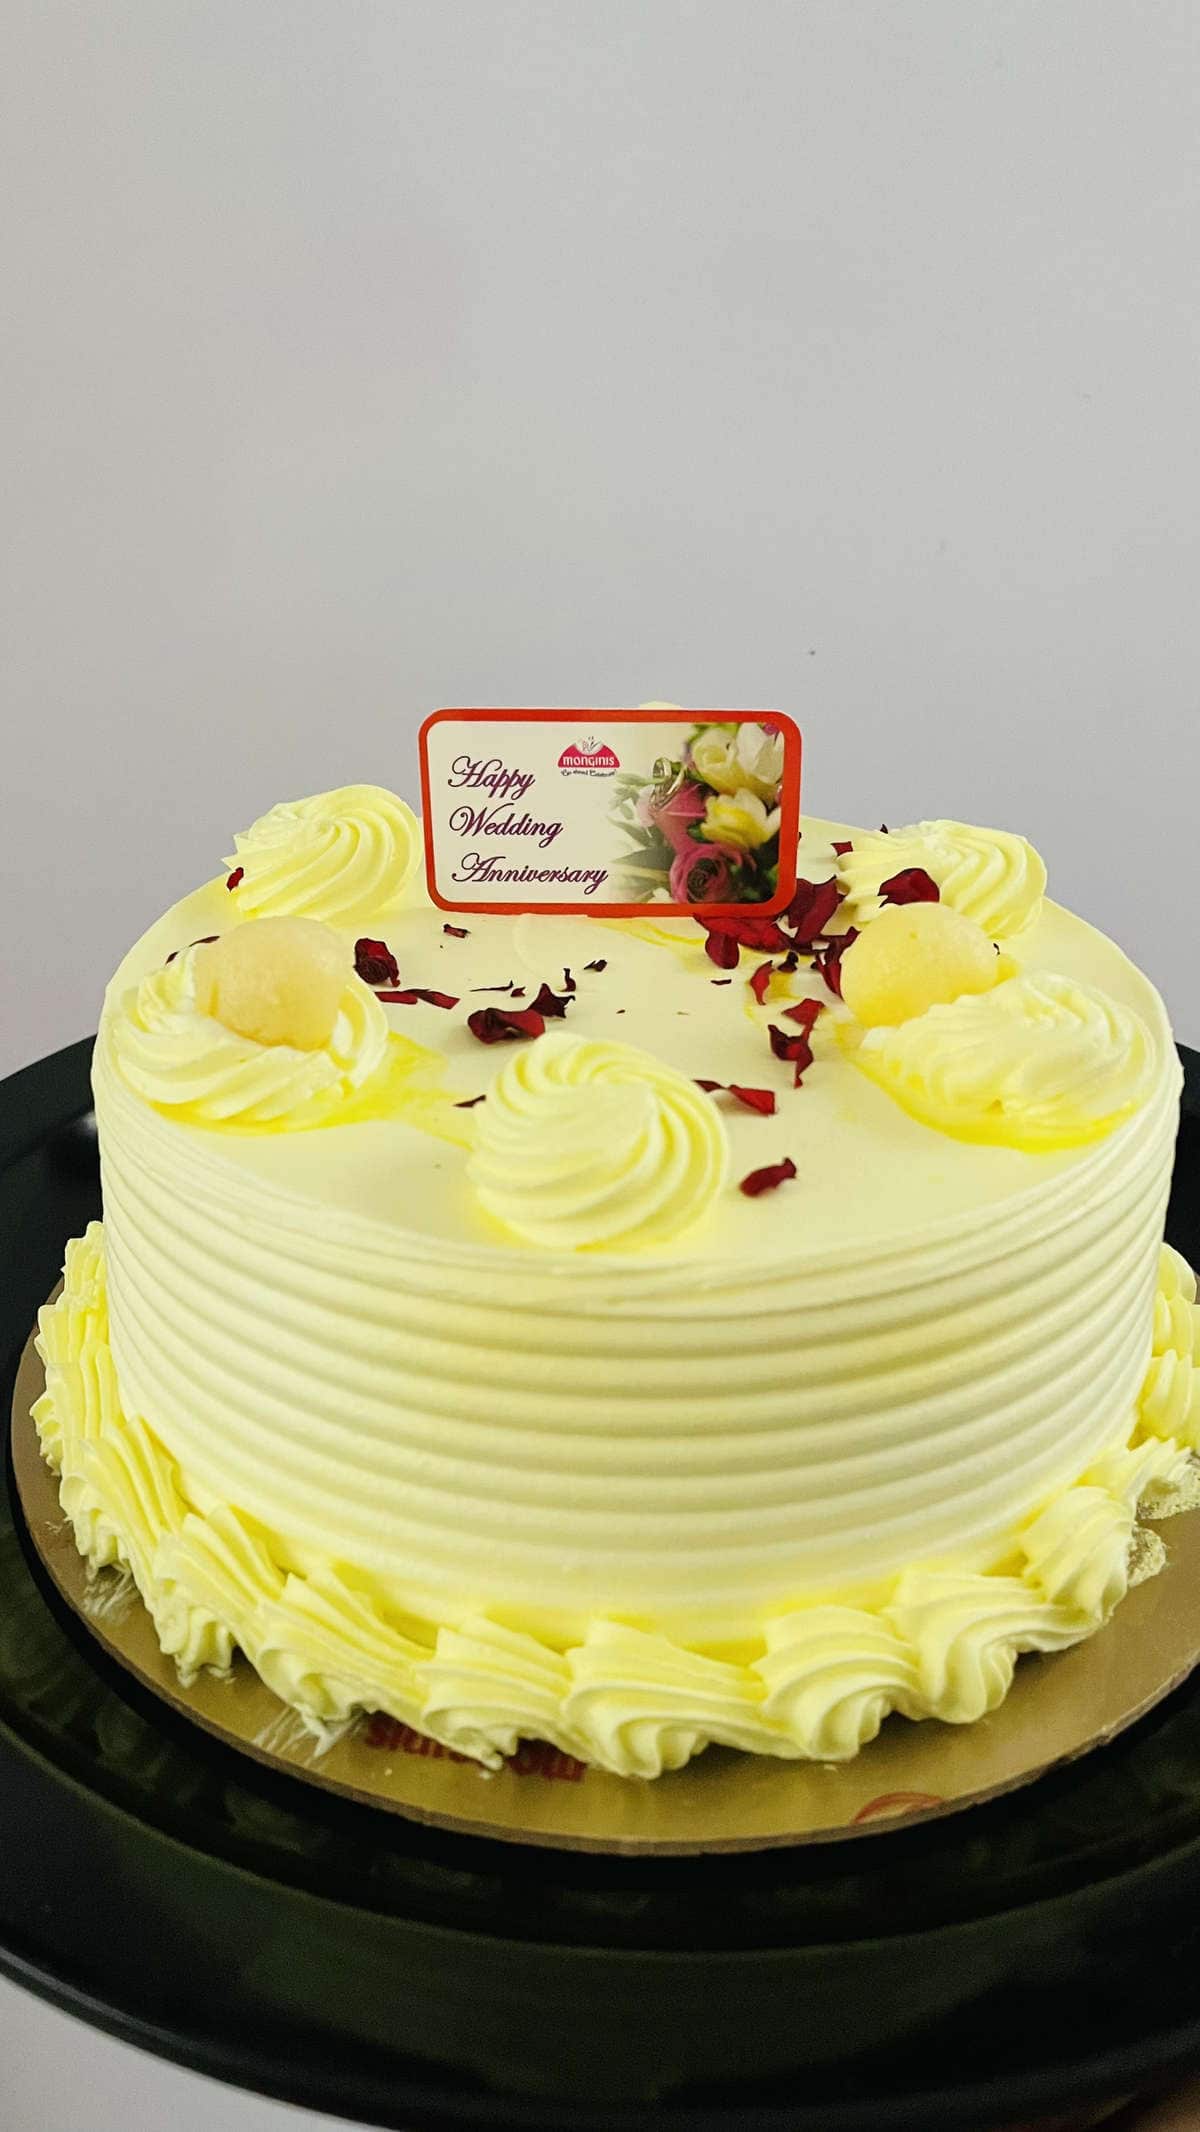 Top Monginis Cake Shops in Virar West - Best Cake Dealers near me - Justdial